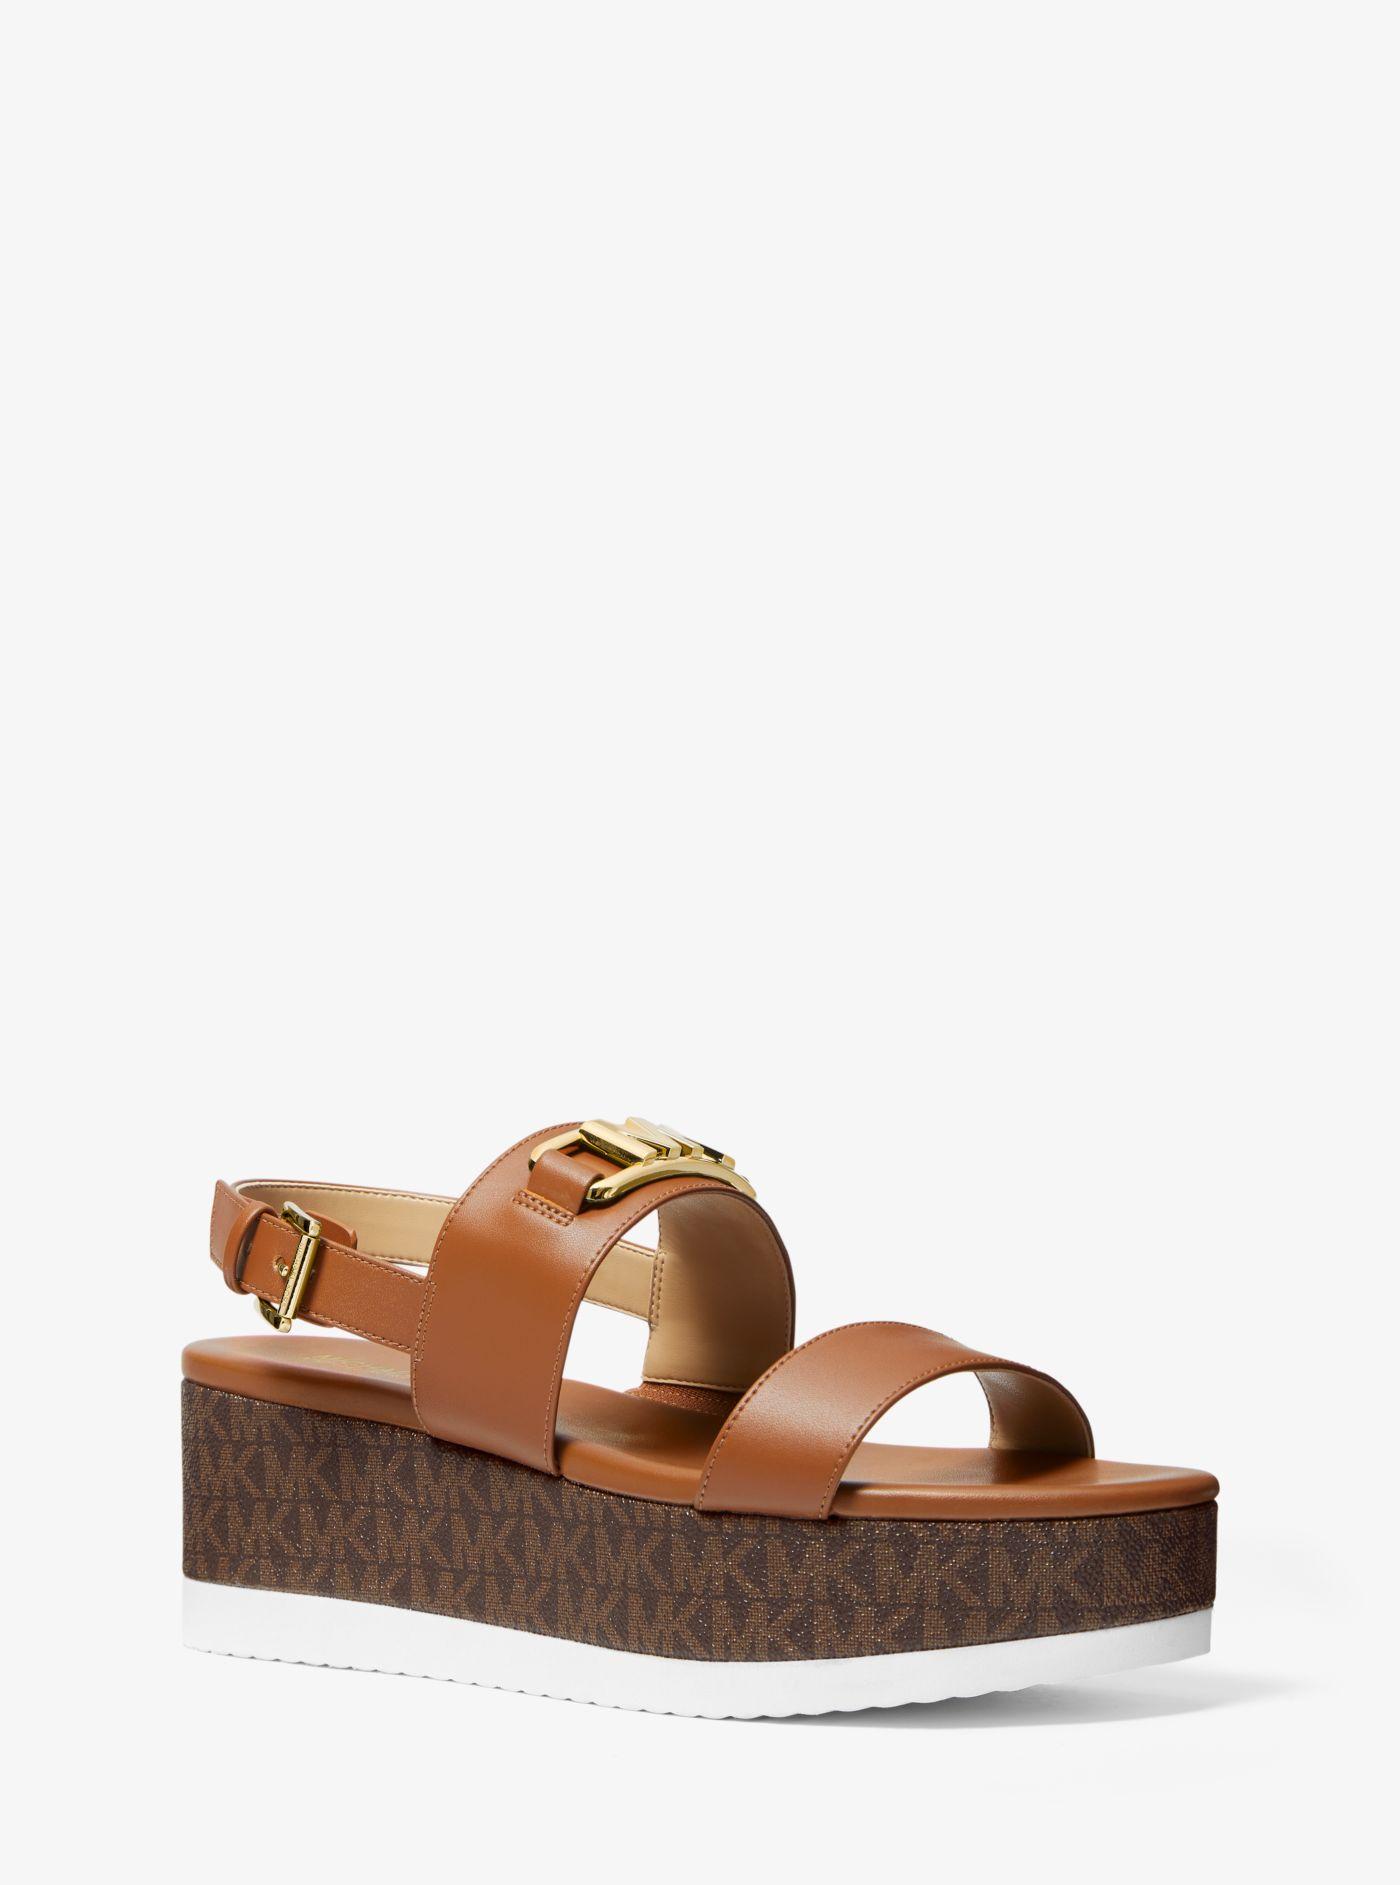 Michael Kors Camila Faux Leather Flatform Sandal in Brown | Lyst